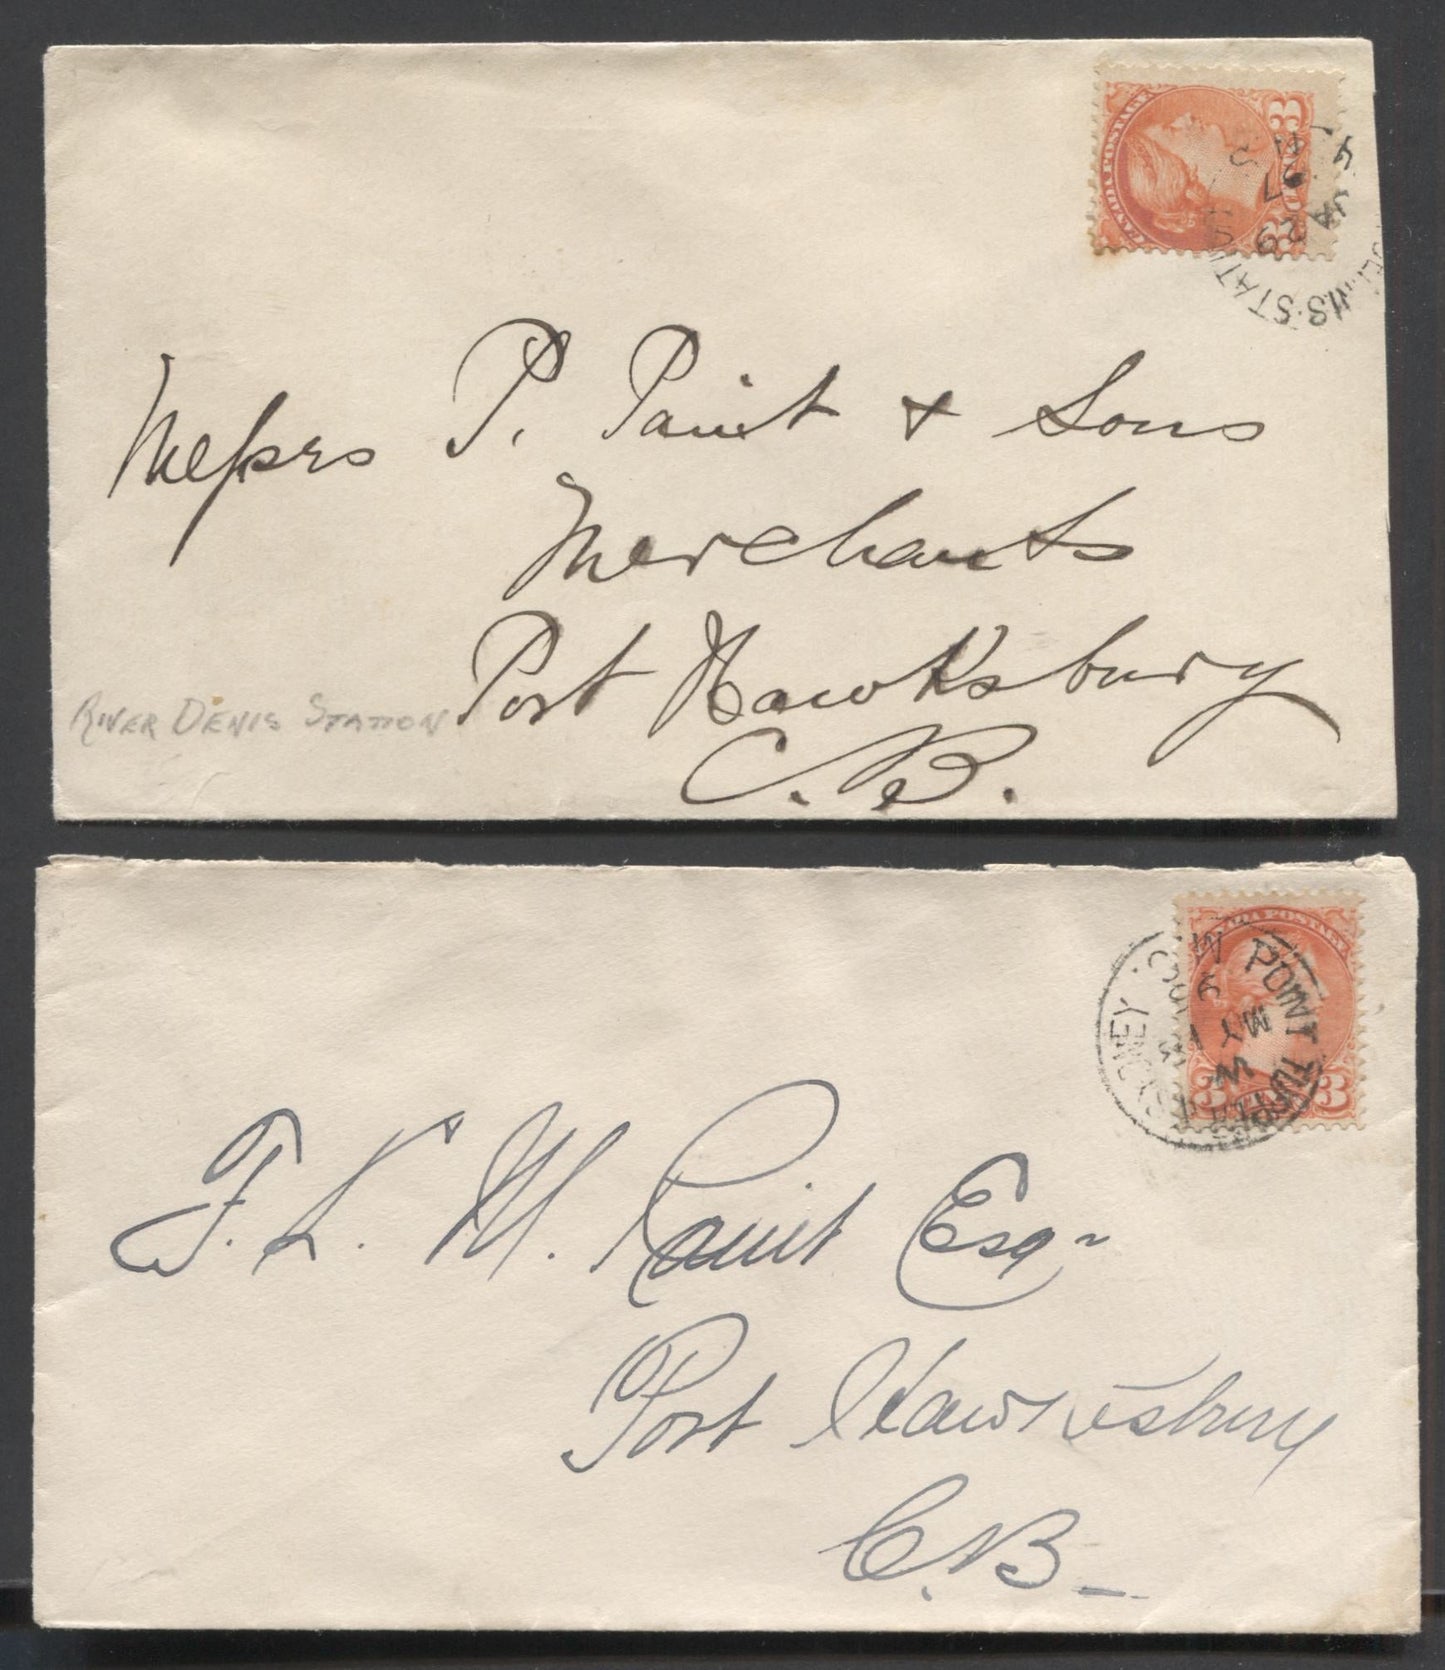 Lot 9 Canada #41 3c Vermilion, 1870-1897 Small Queen Issue, Usage on 2 Covers, Both Sent To P. Paint & Sons, 1895 and 1897